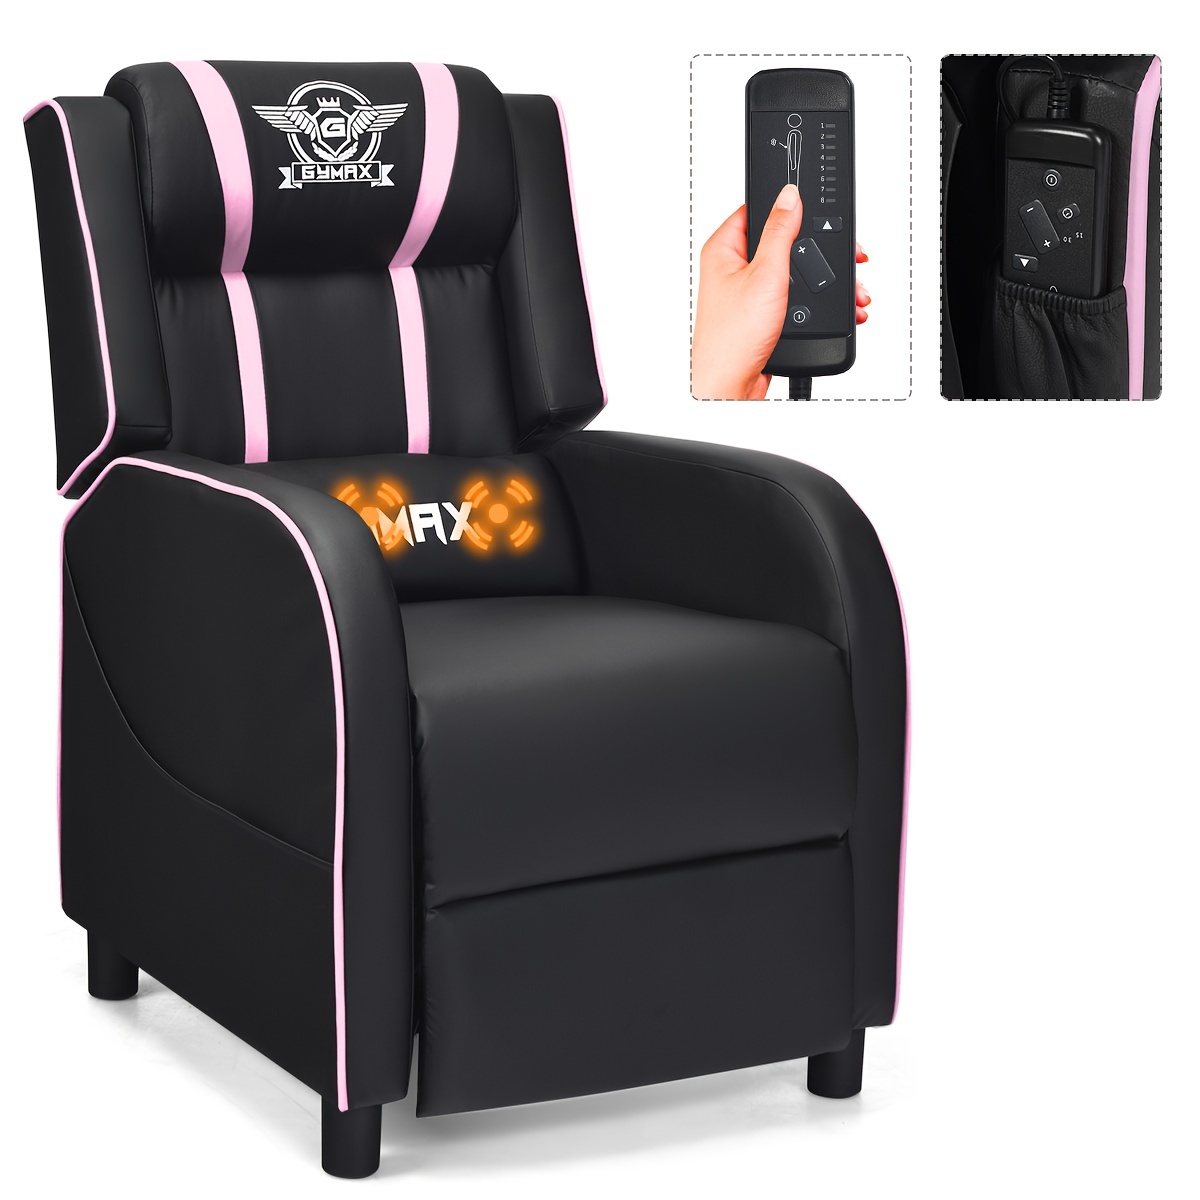 

Massage Gaming Recliner Chair Racing Single Lounge Sofa Home Theater Seat